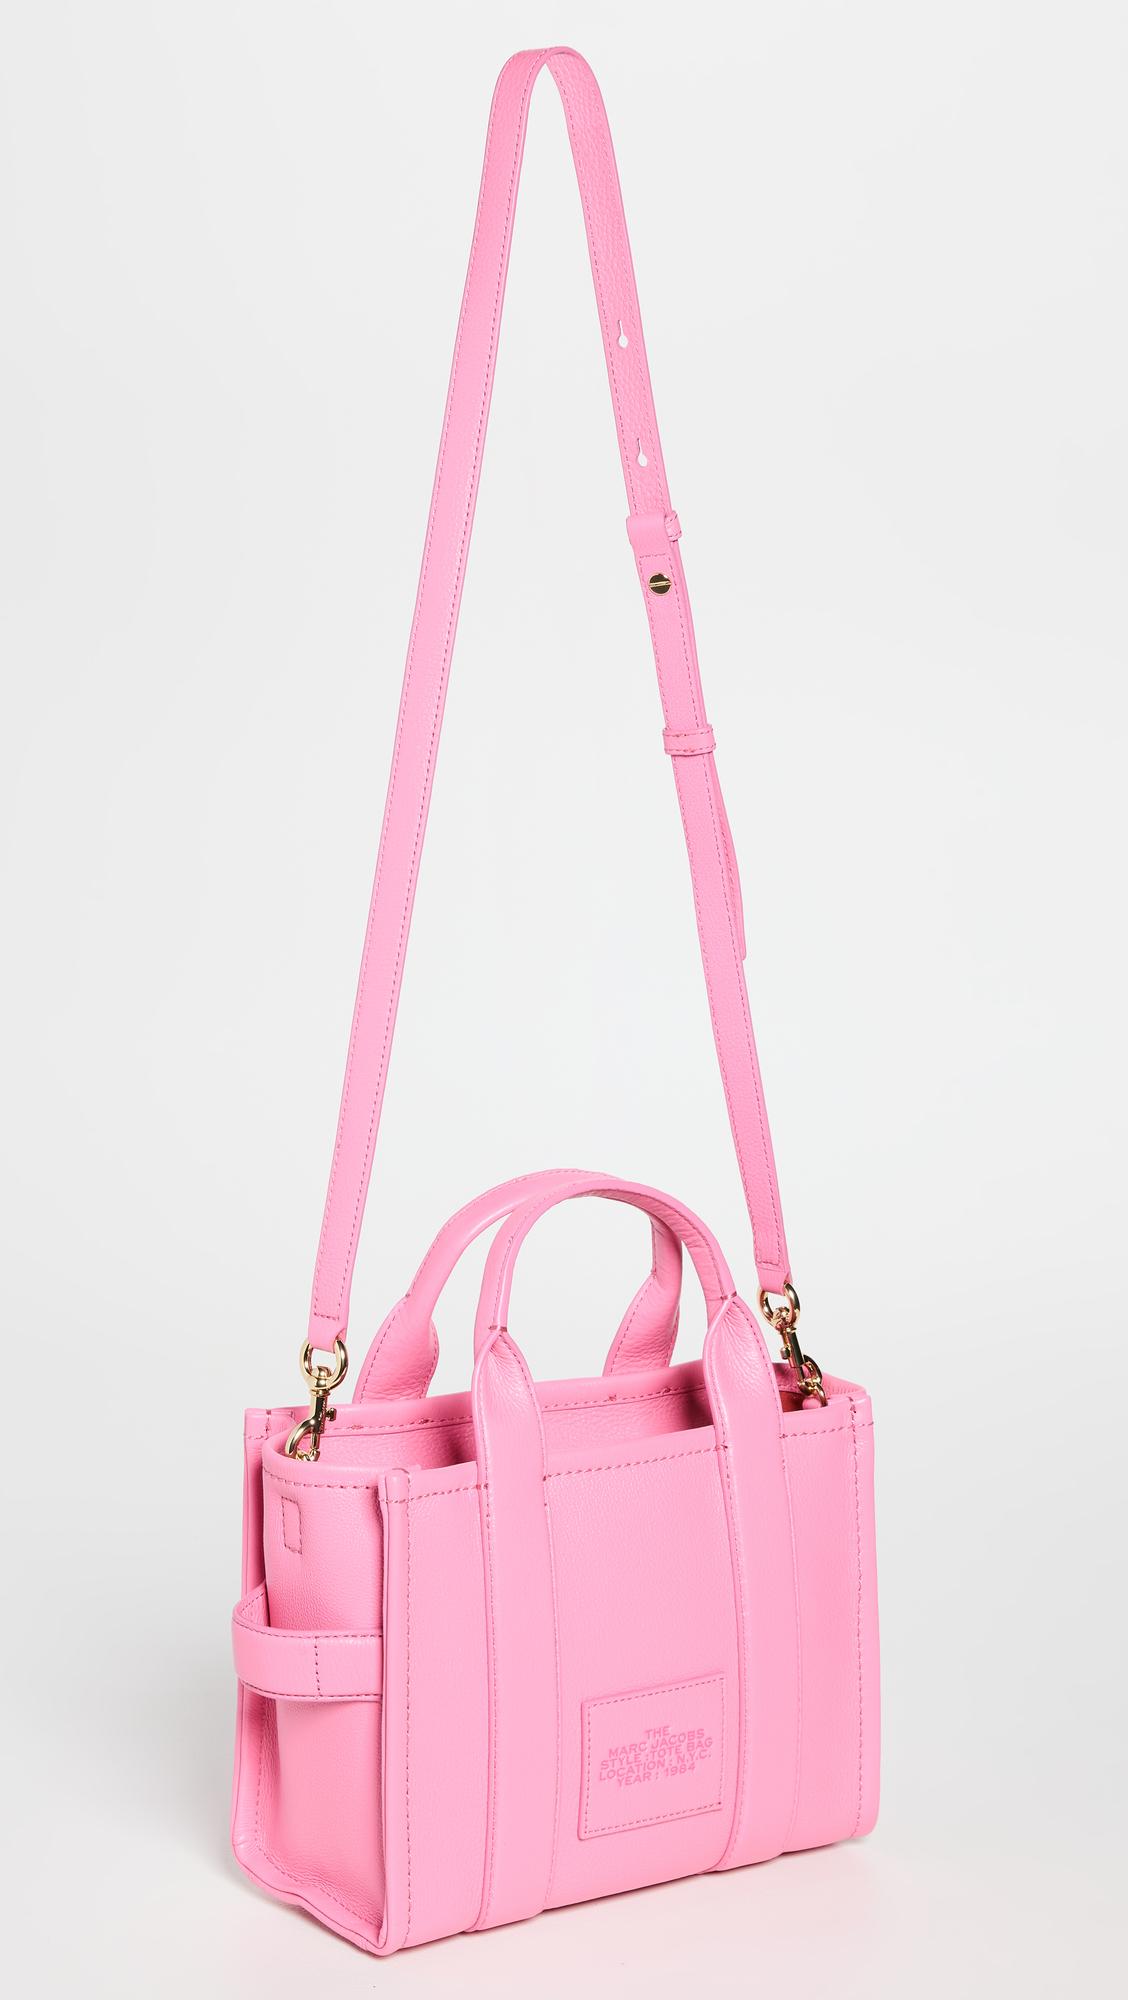 Leather tote Marc Jacobs Pink in Leather - 24883022